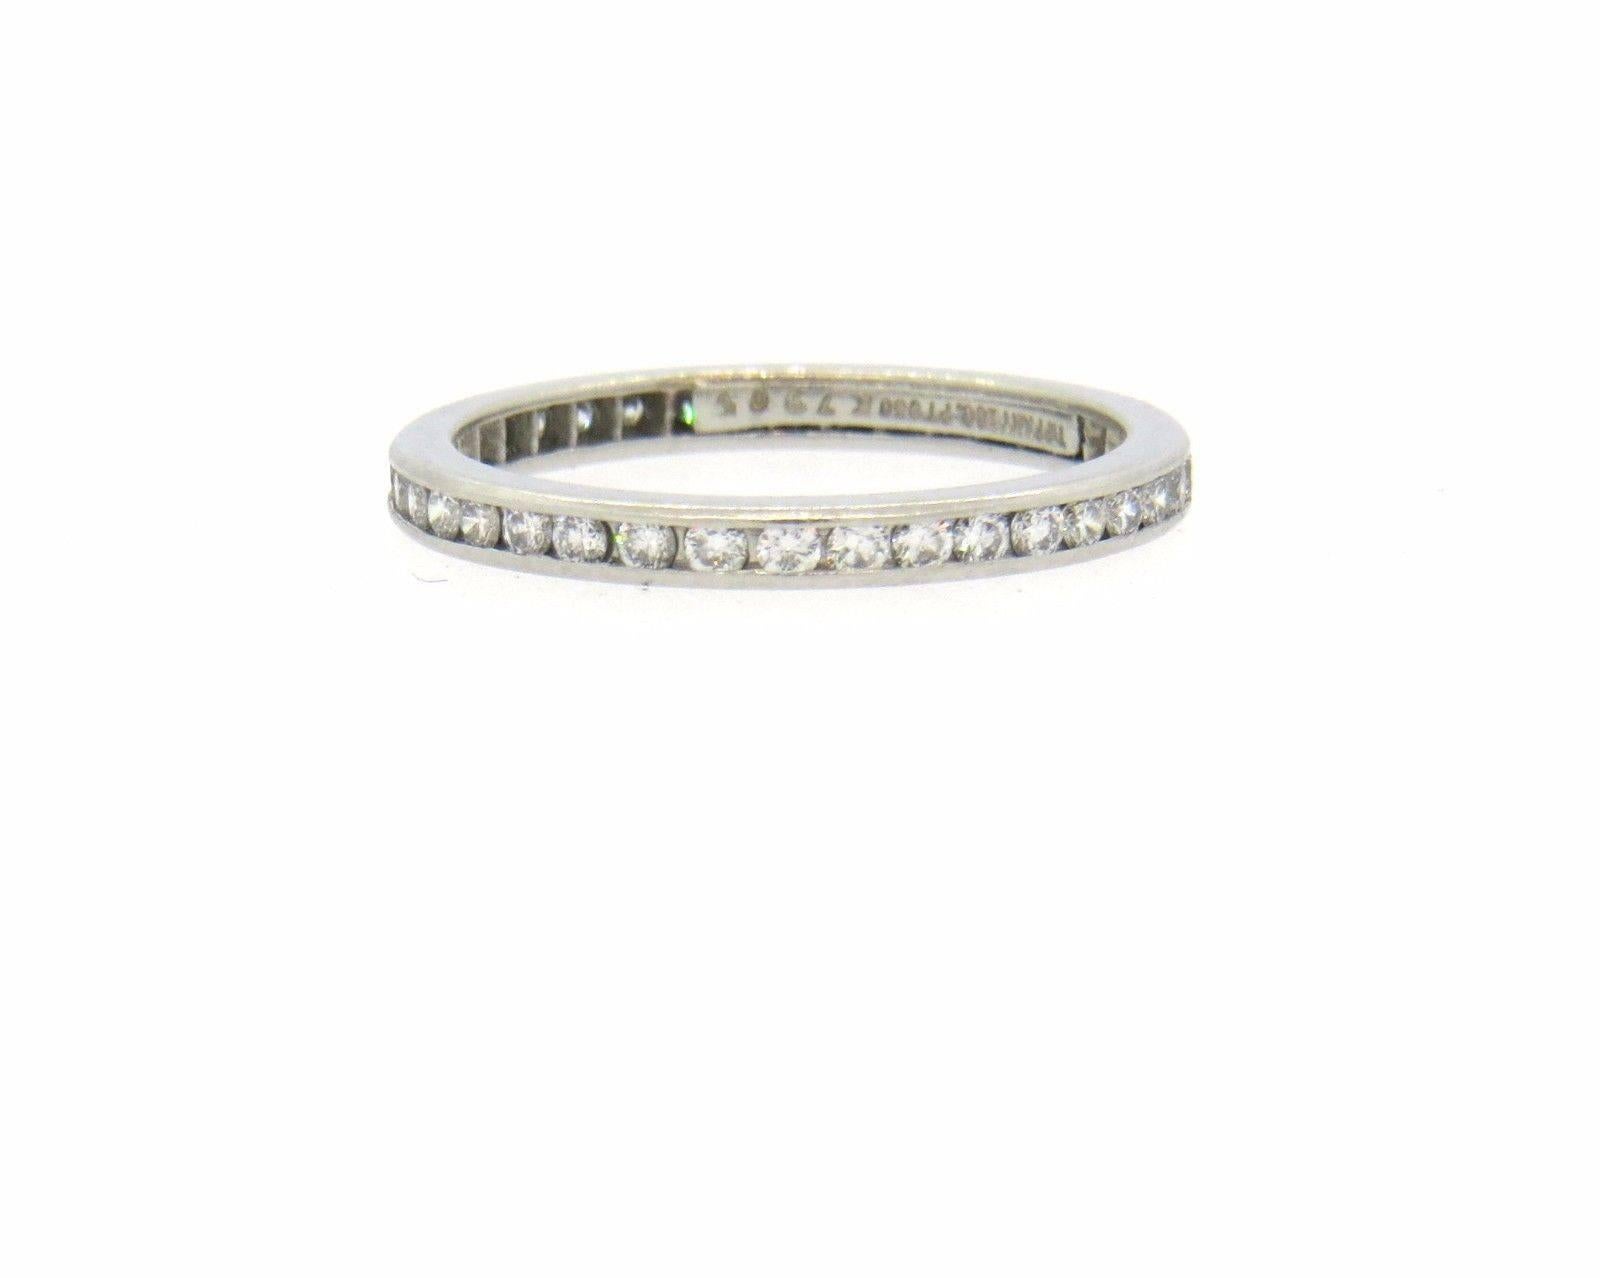 Platinum wedding band ring, crafted by Tiffany & Co for Legacy collection, featuring full circle of approx. 0.40ctw in G/VS diamonds. Ring size 5.5, band is 2mm wide. Marked: Tiffany & Co. PT950. Weight of the piece - 2.4 grams